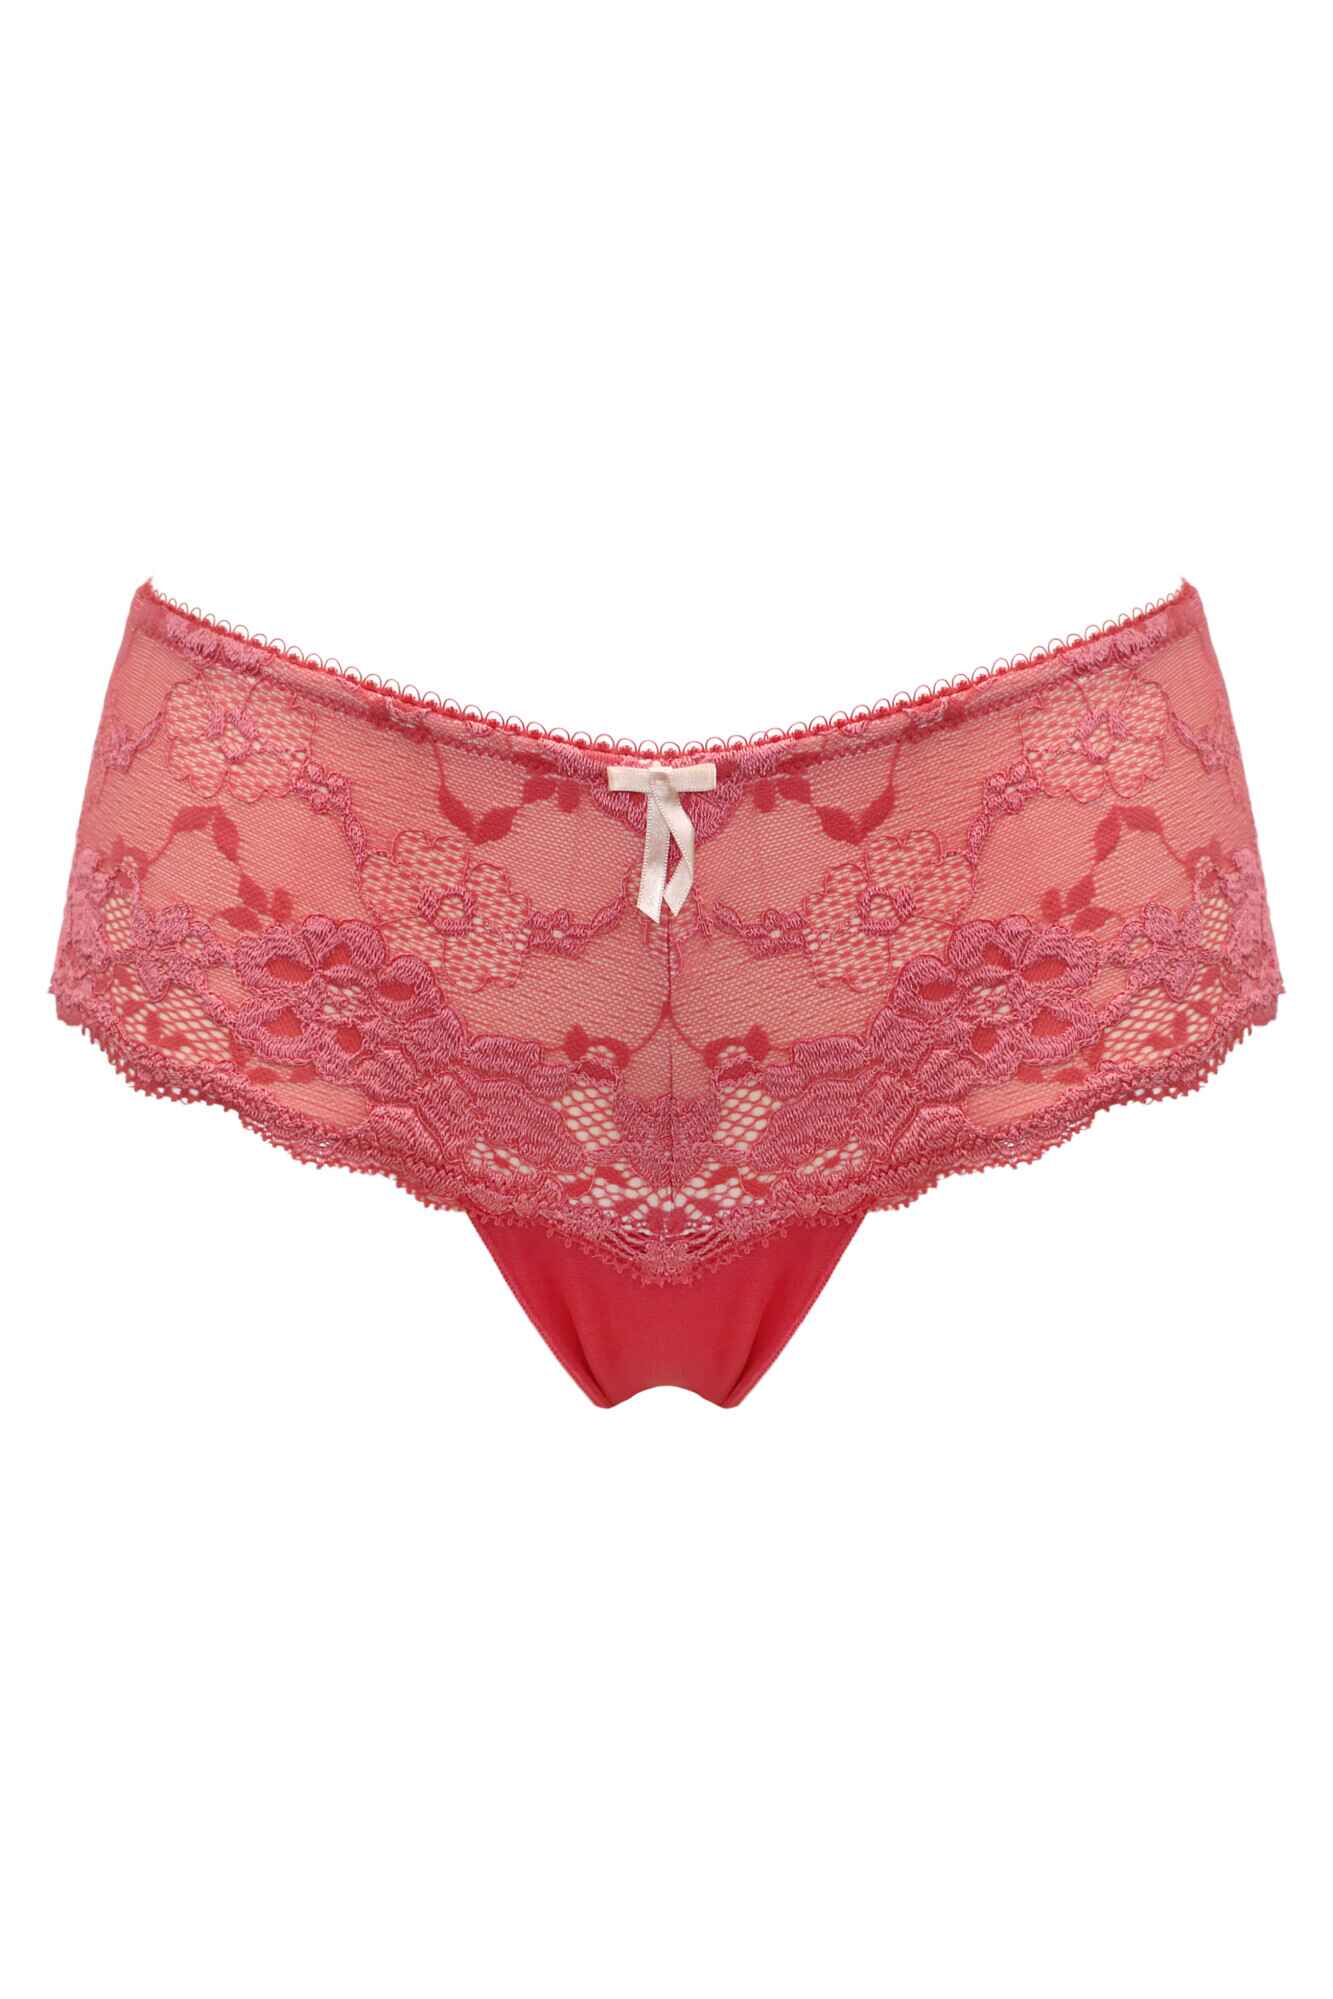 lace nude sexy short panty french